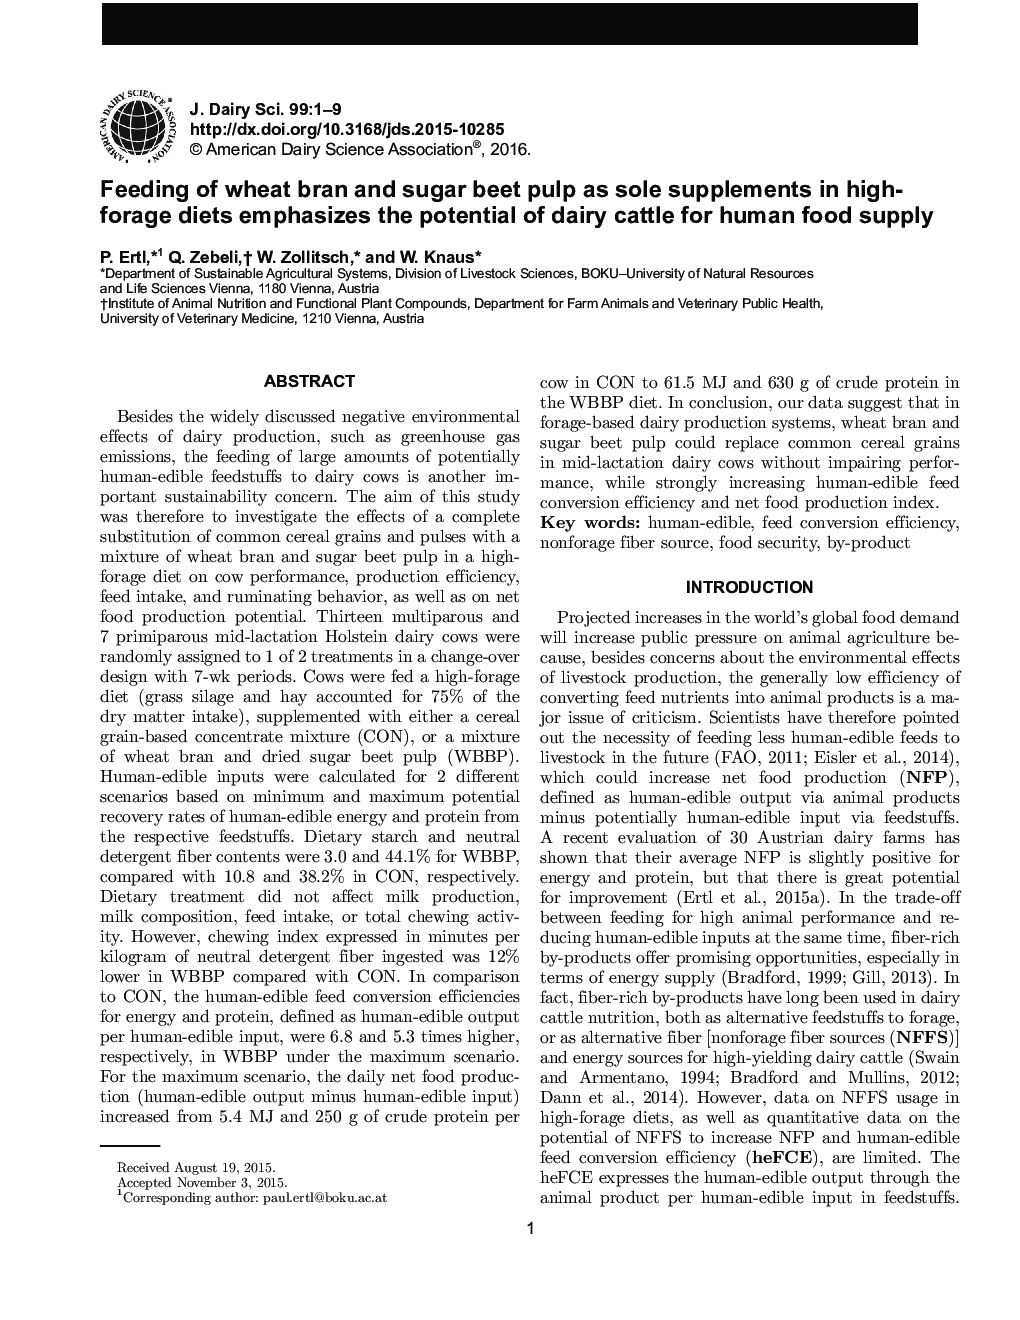 Feeding of wheat bran and sugar beet pulp as sole supplements in high-forage diets emphasizes the potential of dairy cattle for human food supply